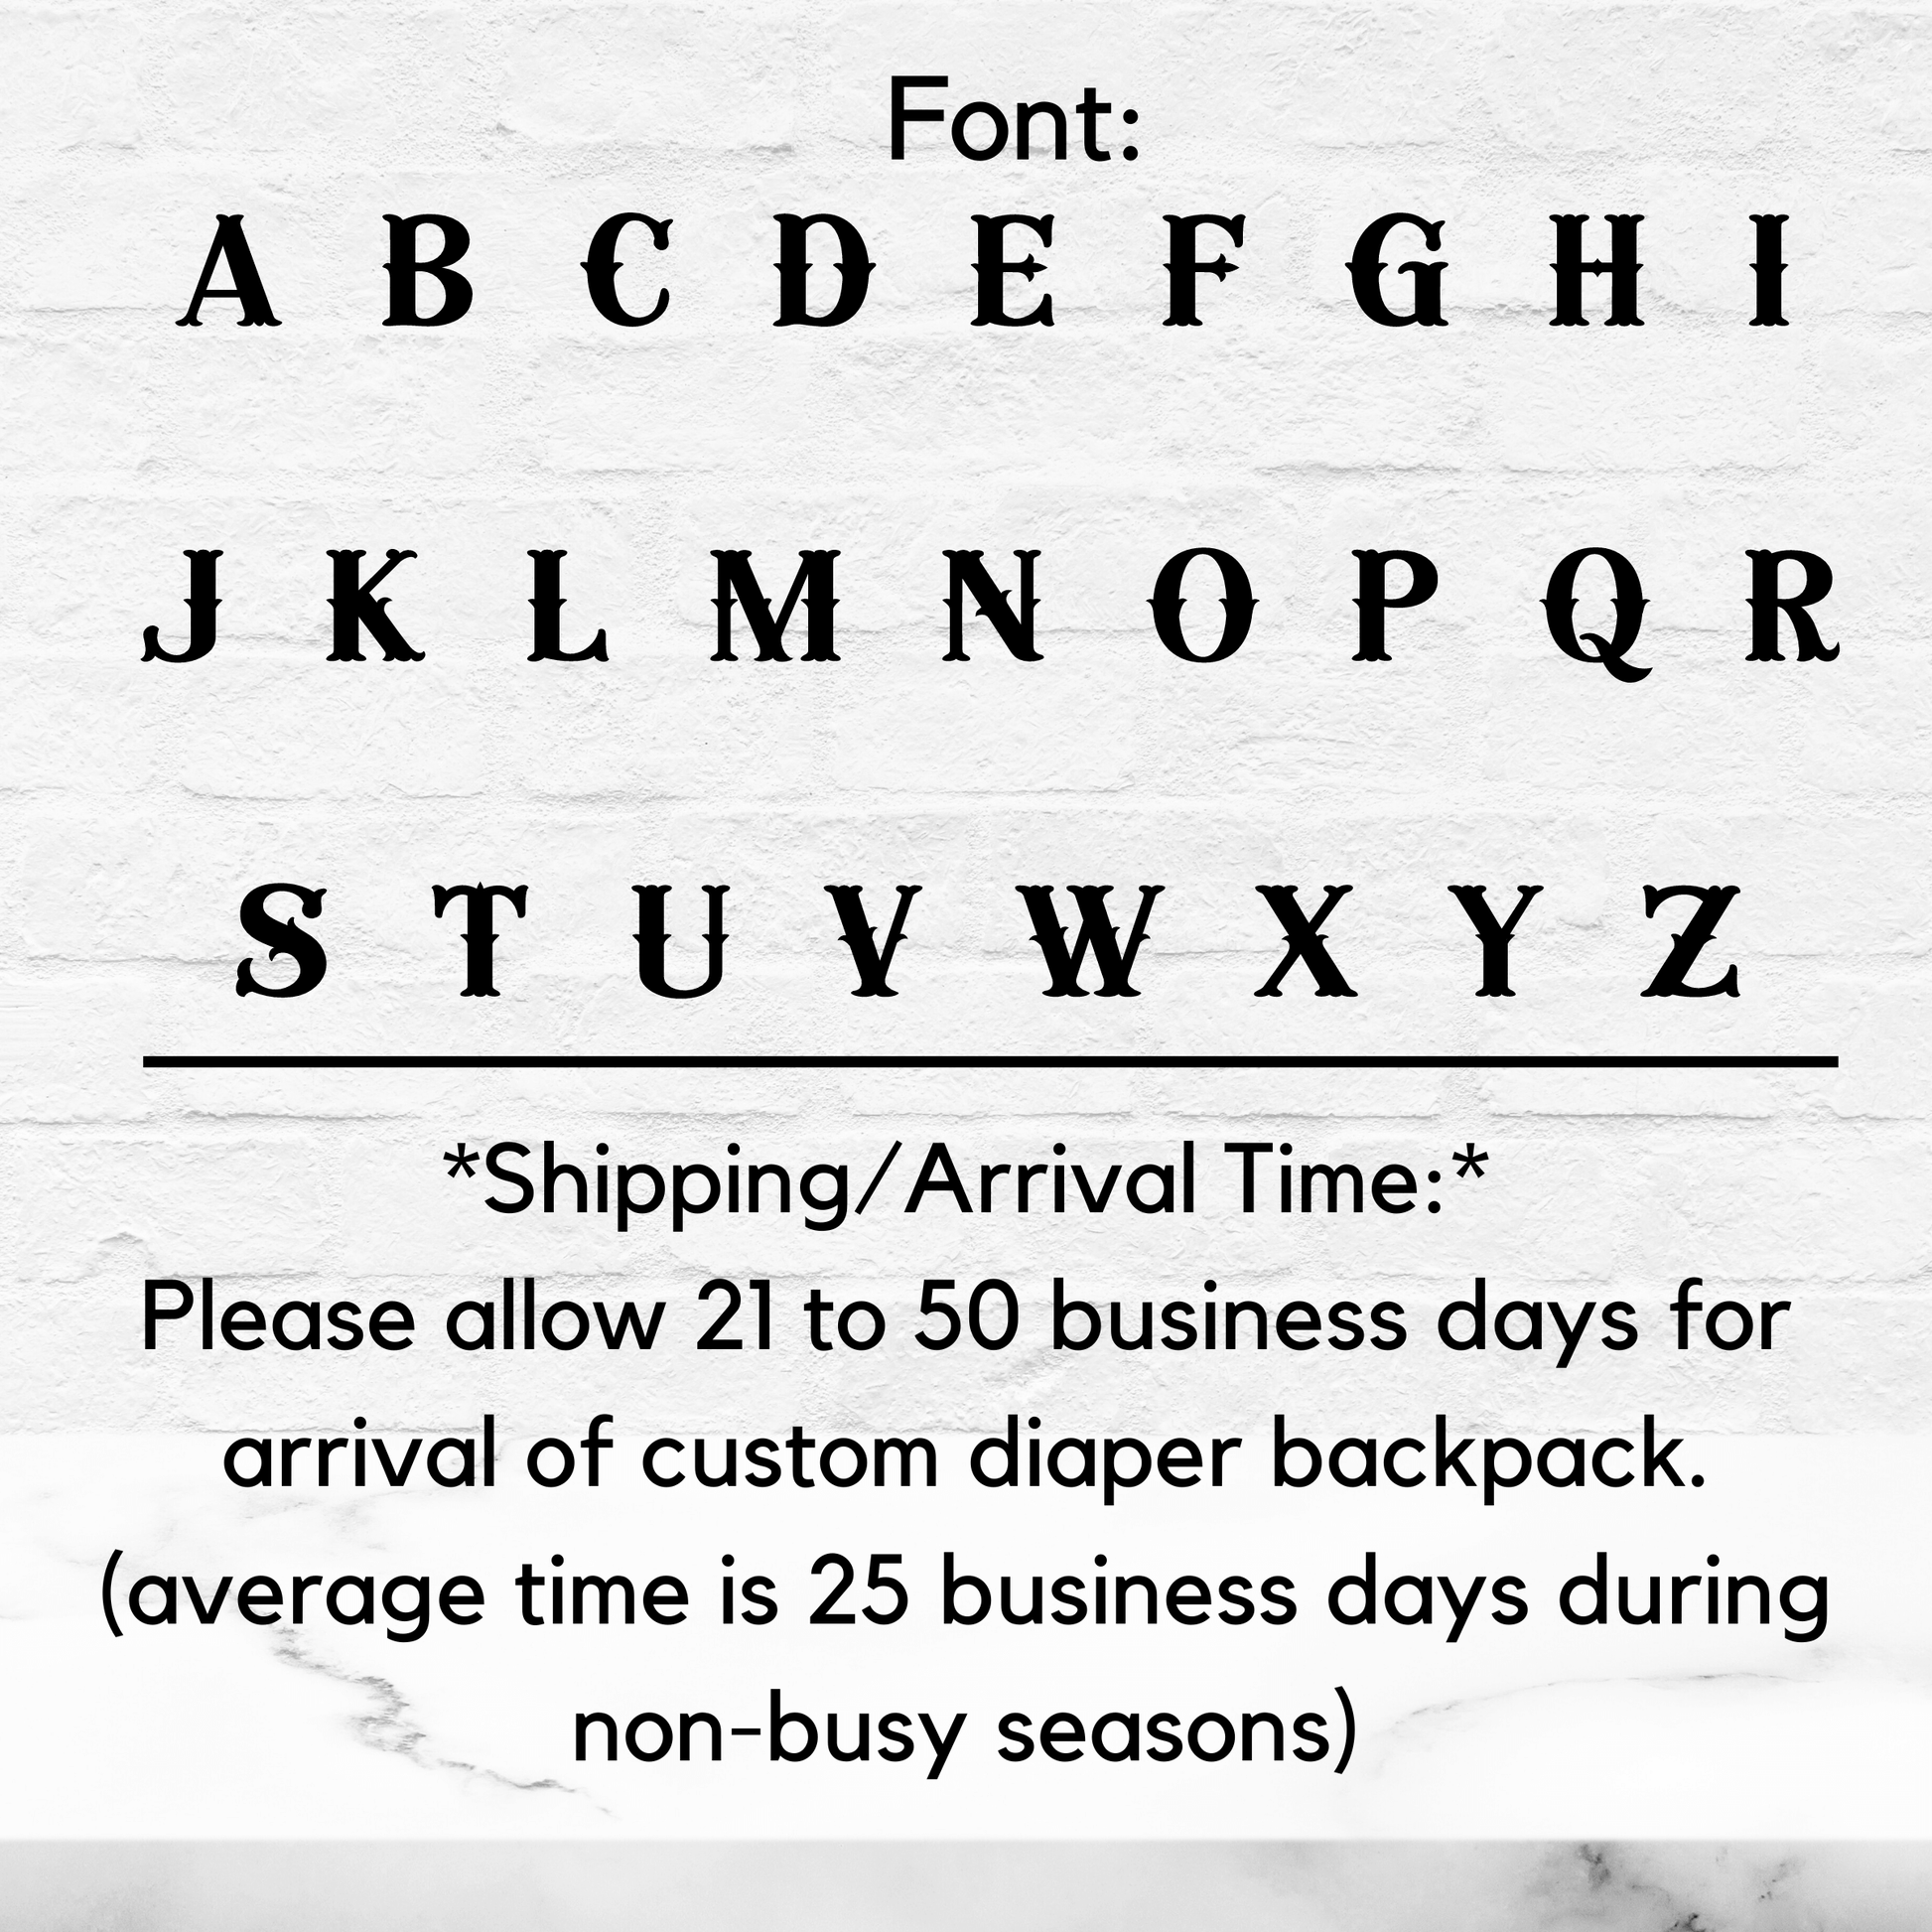 OUr western font used for personalizing your backpack shows the entire alphabet. Average arrival time for backpack is twenty five biz days.